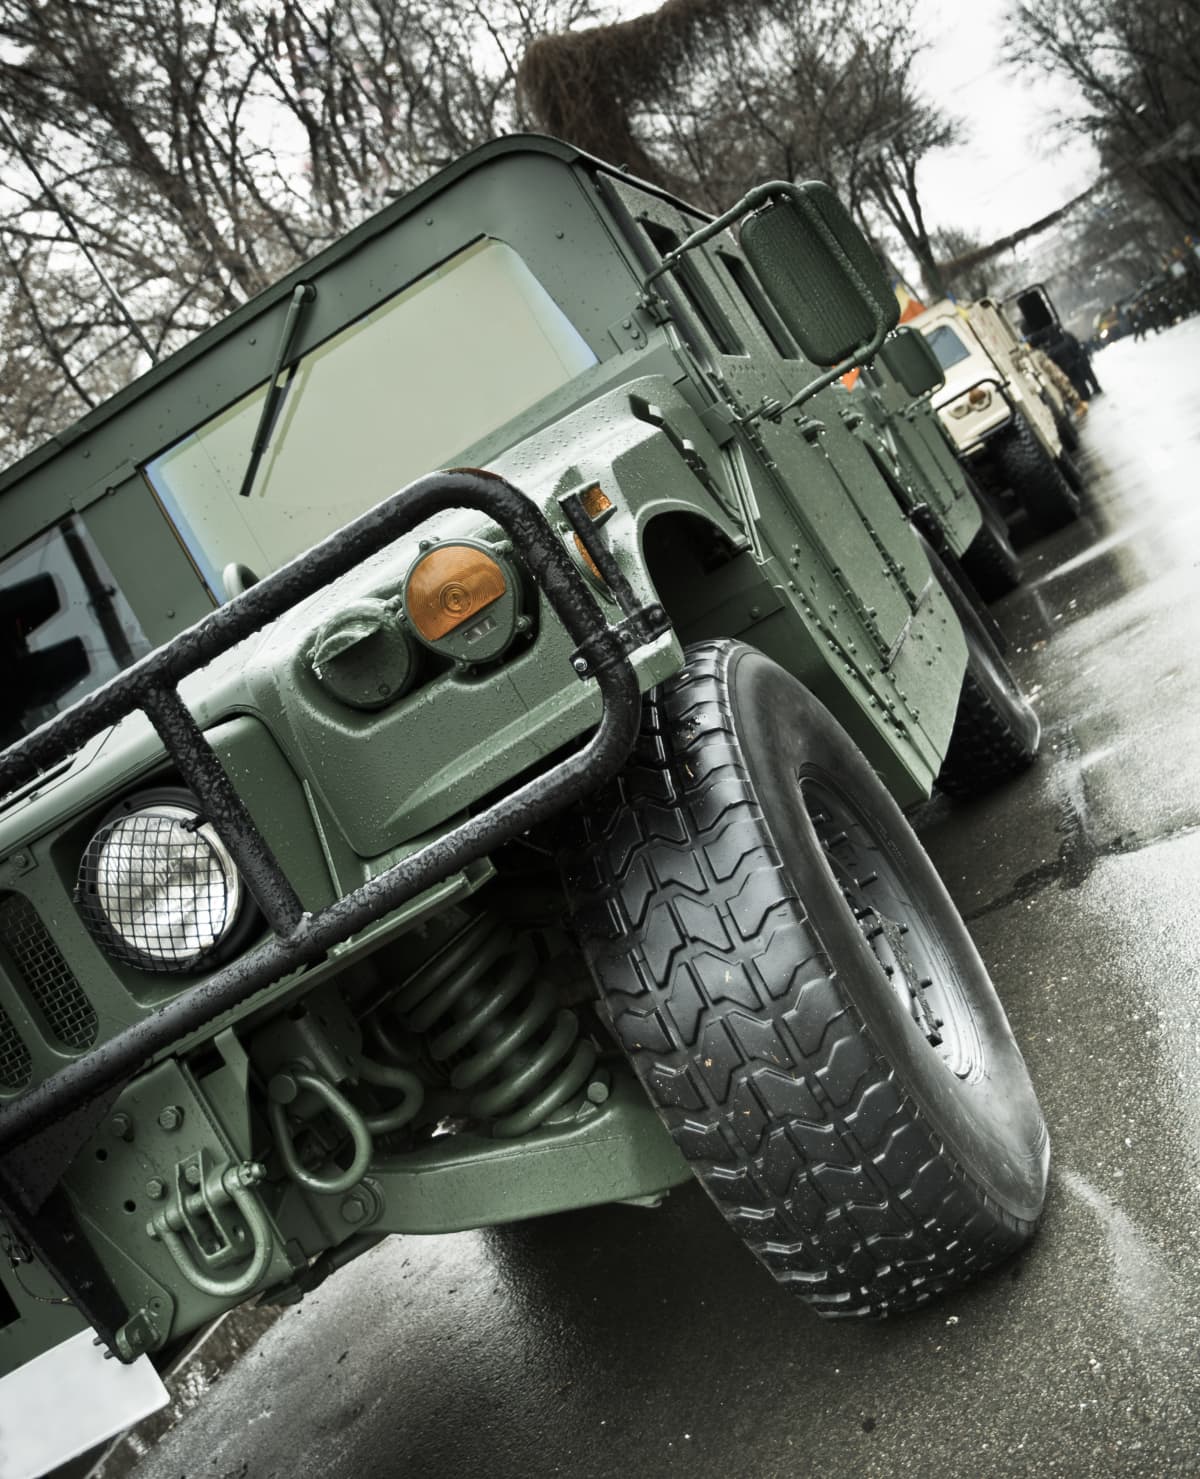 Close up view of an armored HMMWV parked in a convoy row. The picture was taken on an icy rainy day. War Concept. Here are some other about cars editorial photos: